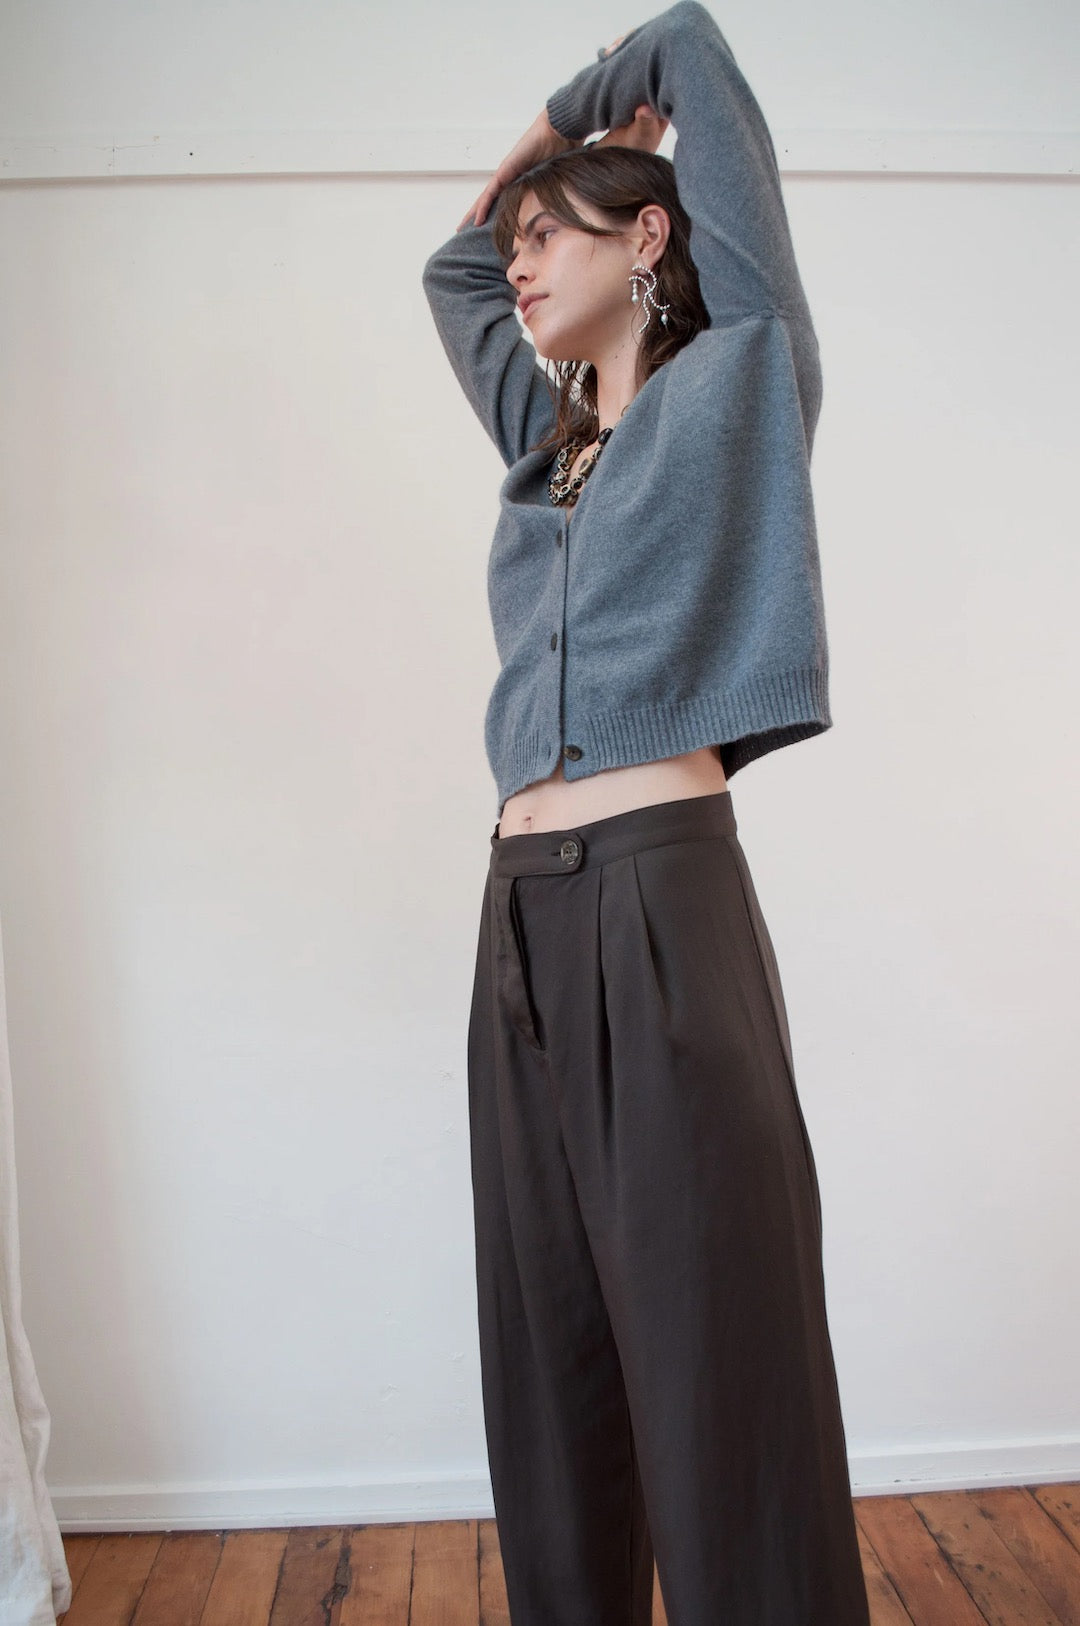 A woman is standing in a room wearing an OVNA OVICH Kom Cardigan - Stone and wide leg pants.